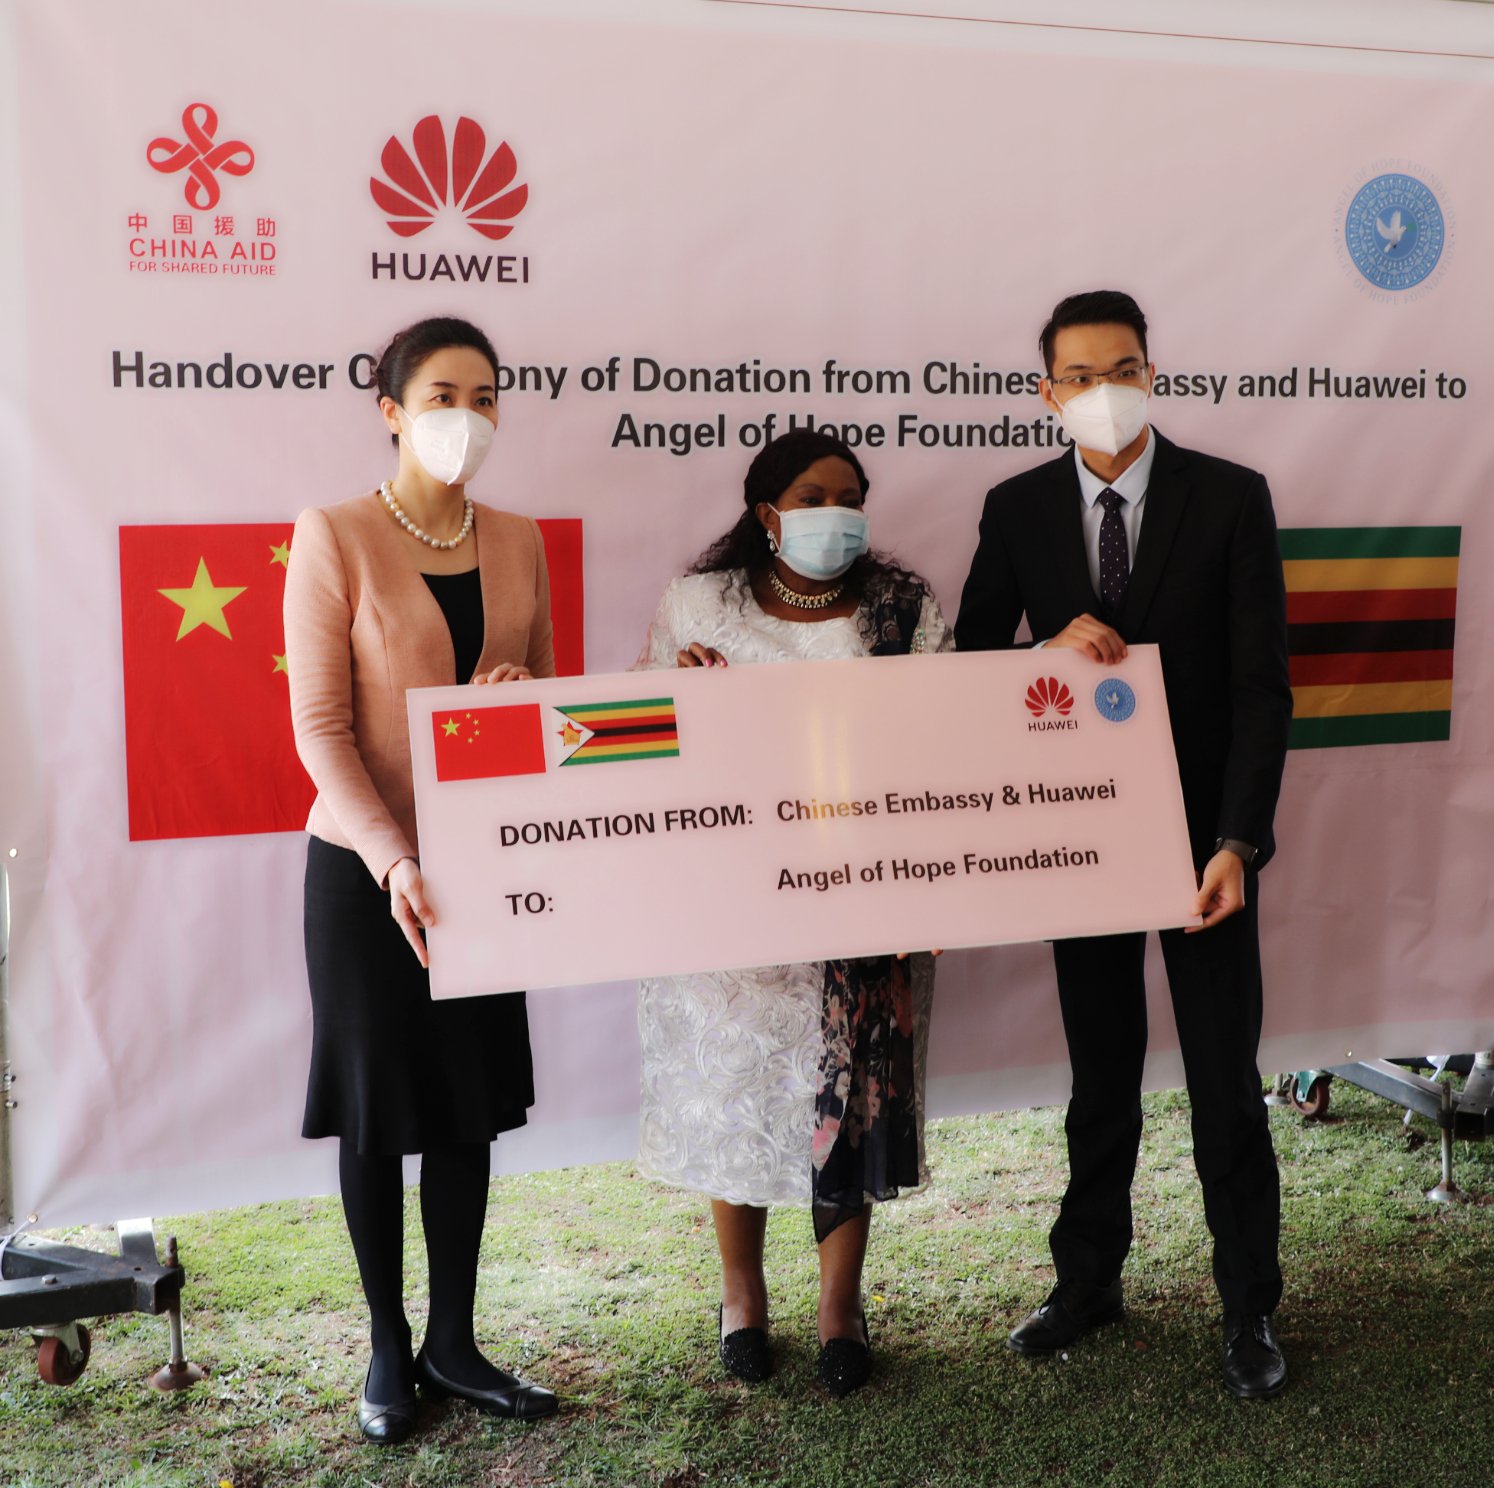 Chinese Embassy donation to Zimbabwe strengthens two countries’ bilateral relations